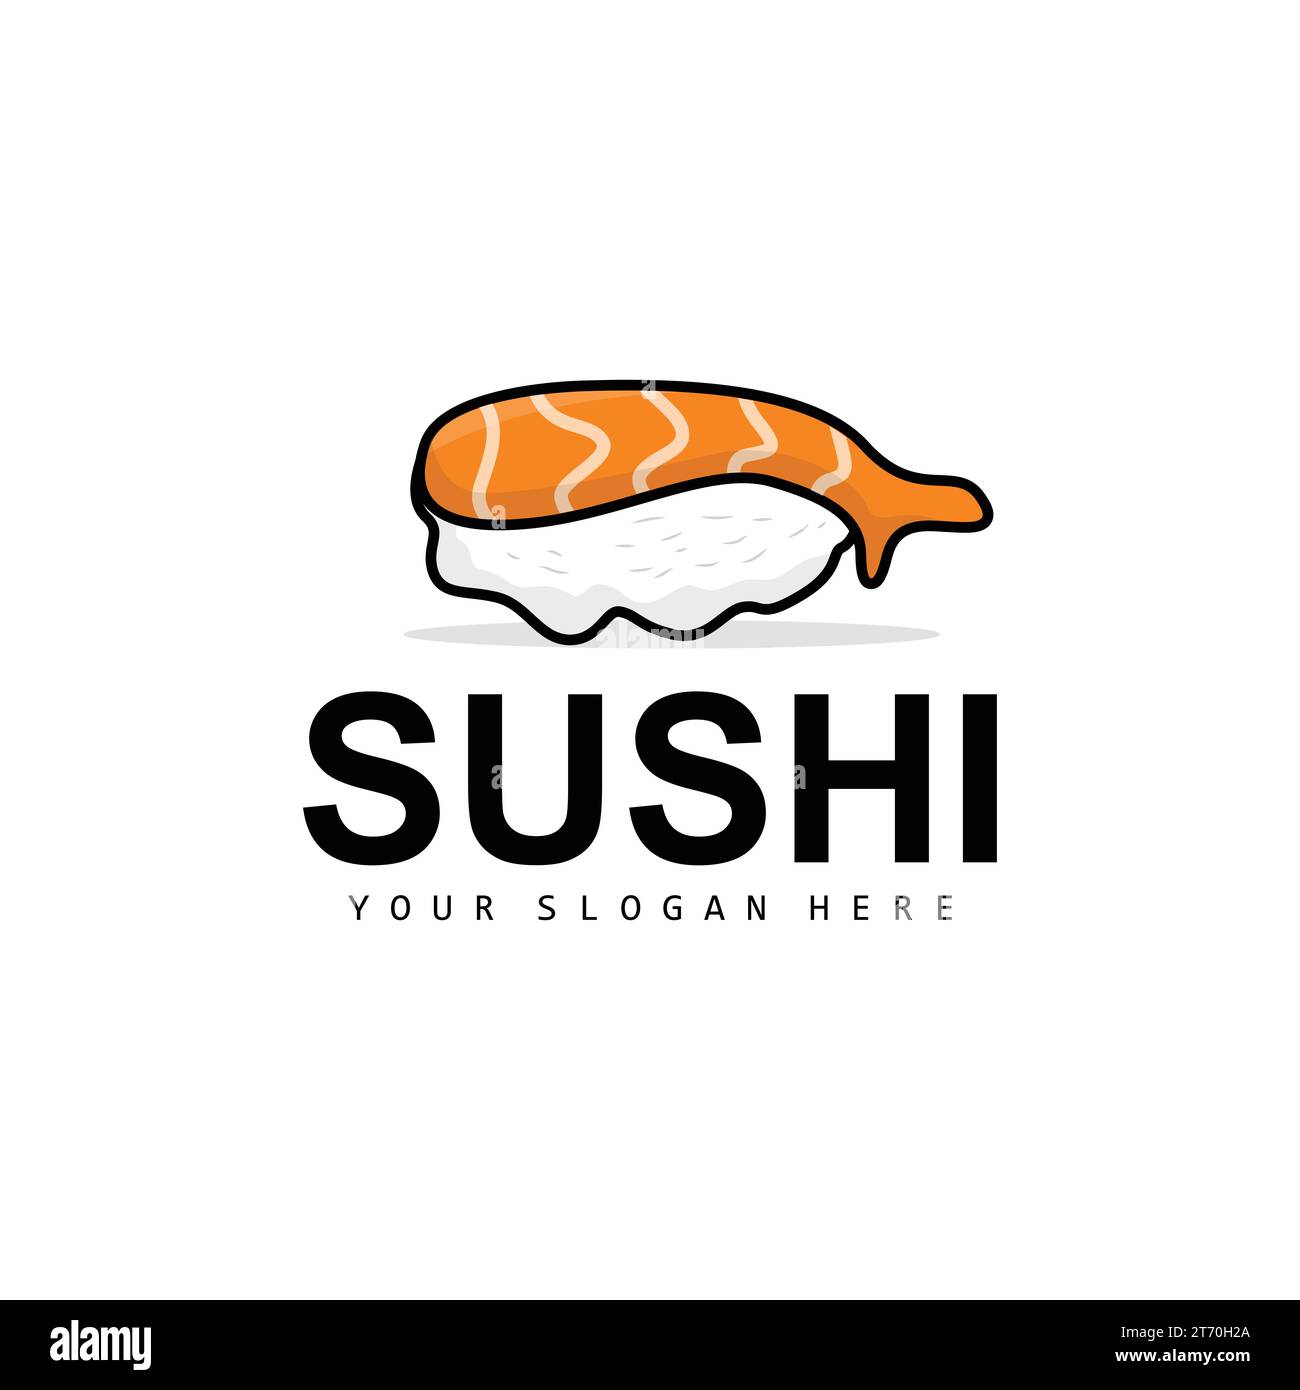 Sushi Logo, Japanese Food Sushi Seafood Vector, Japanese Cuisine Product Brand Design, Template Icon Stock Vector